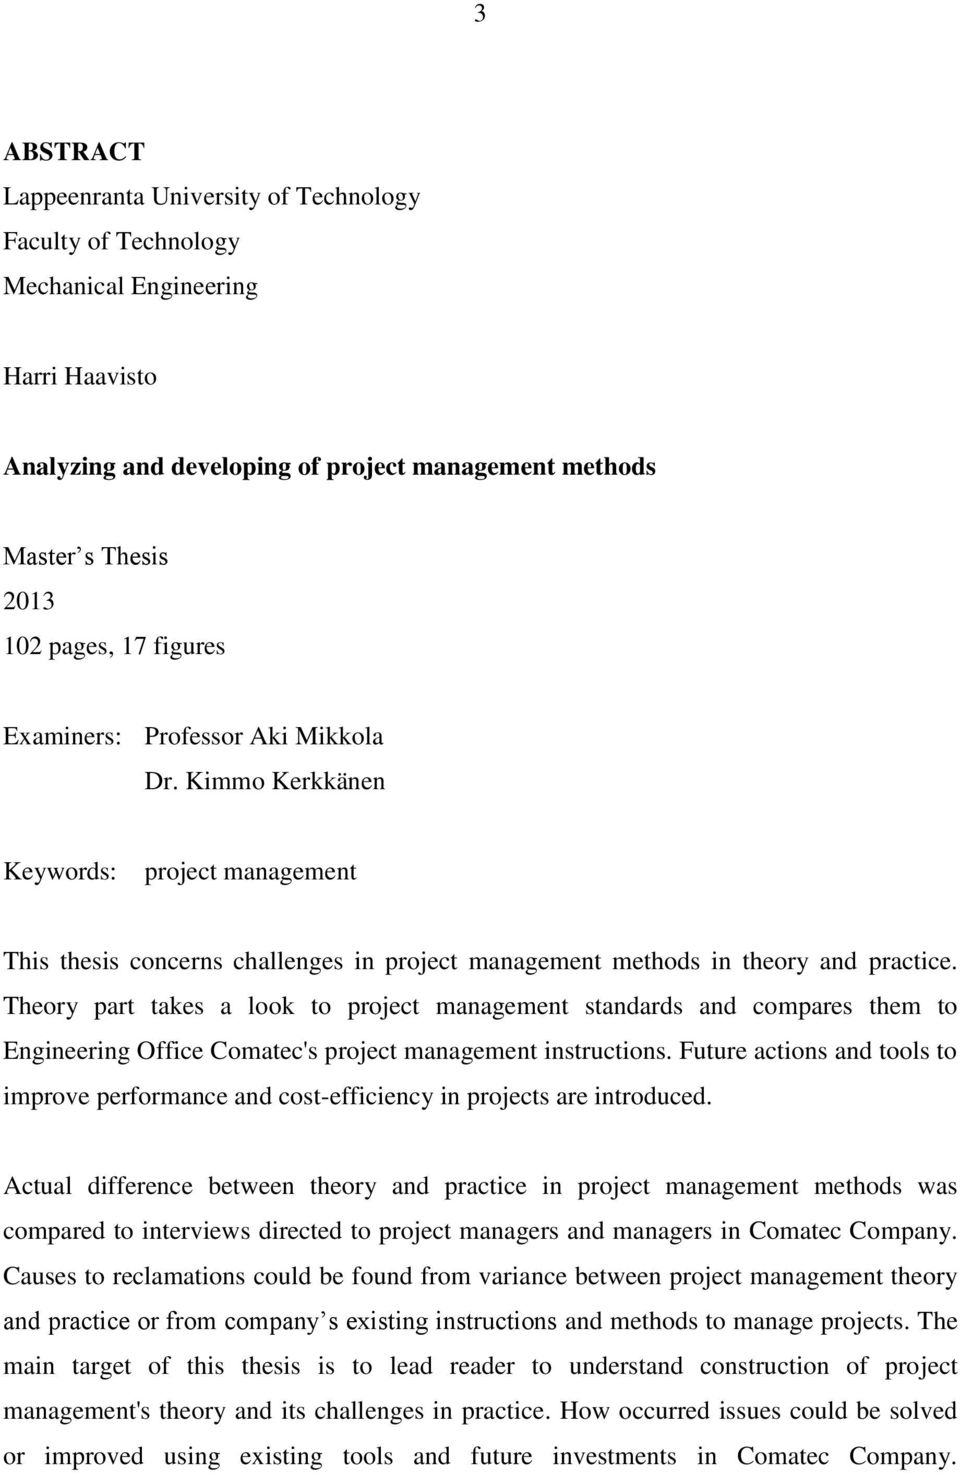 Theory part takes a look to project management standards and compares them to Engineering Office Comatec's project management instructions.